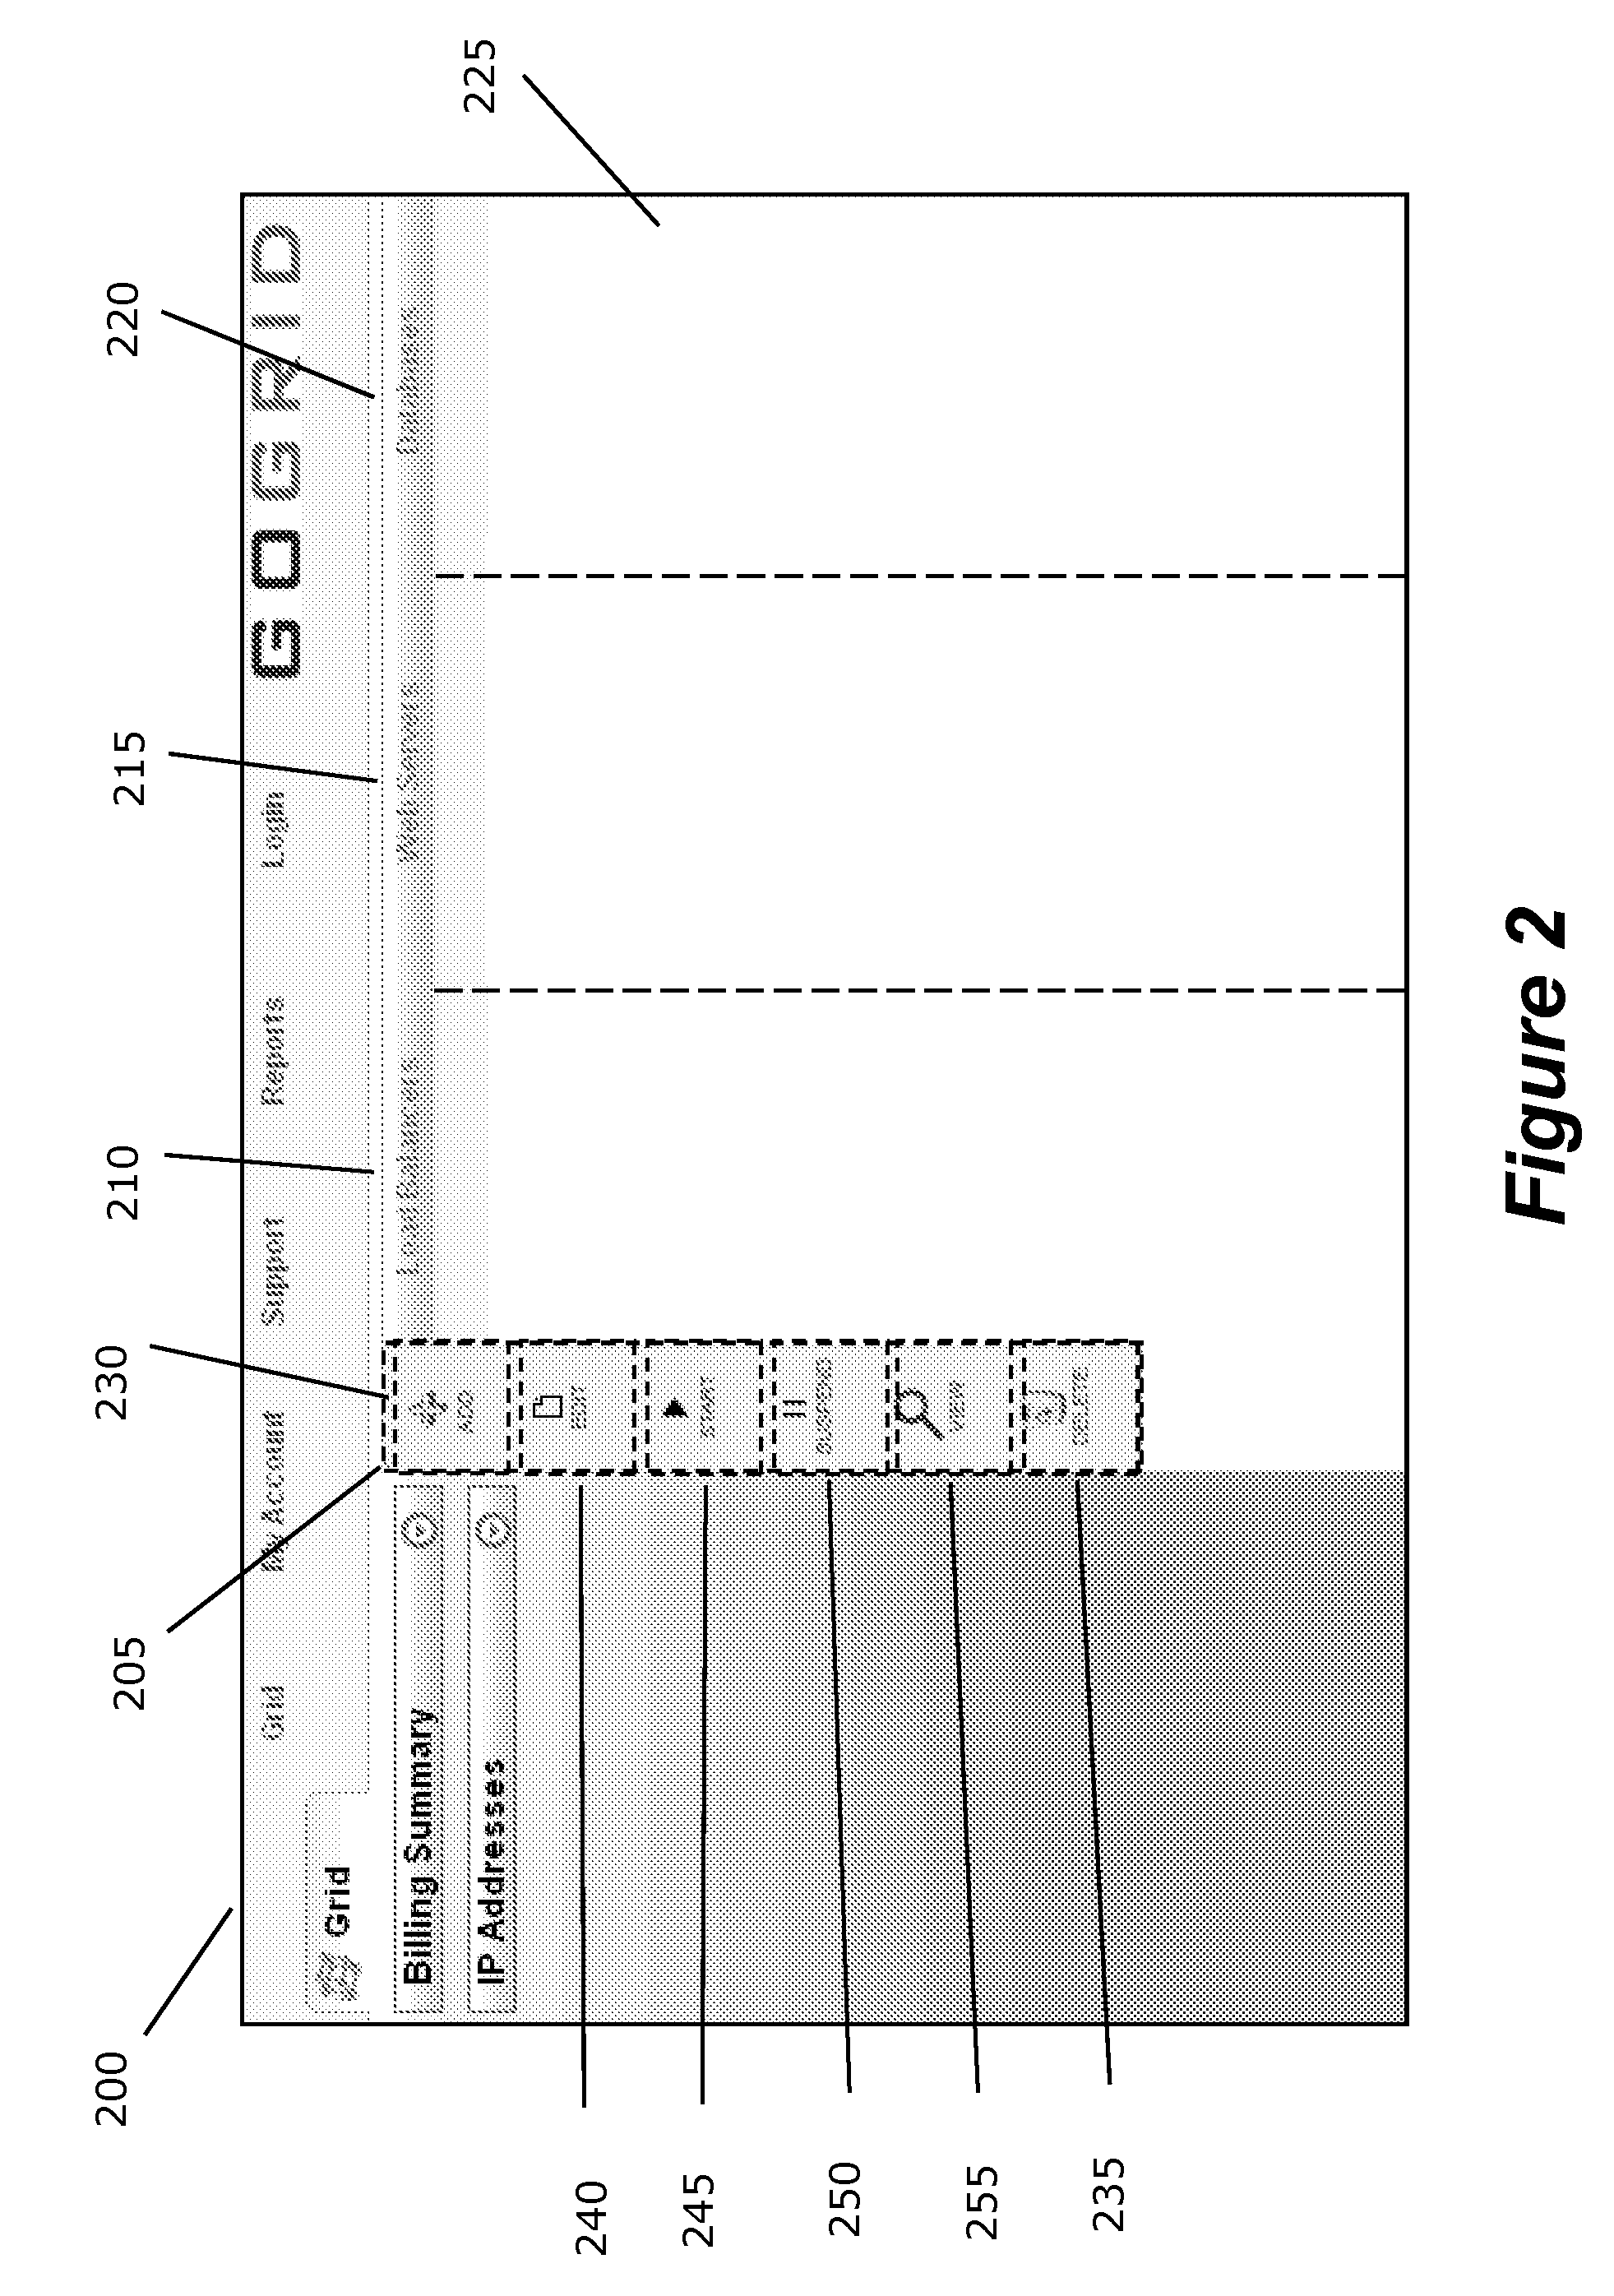 System and Method for Billing for Hosted Services